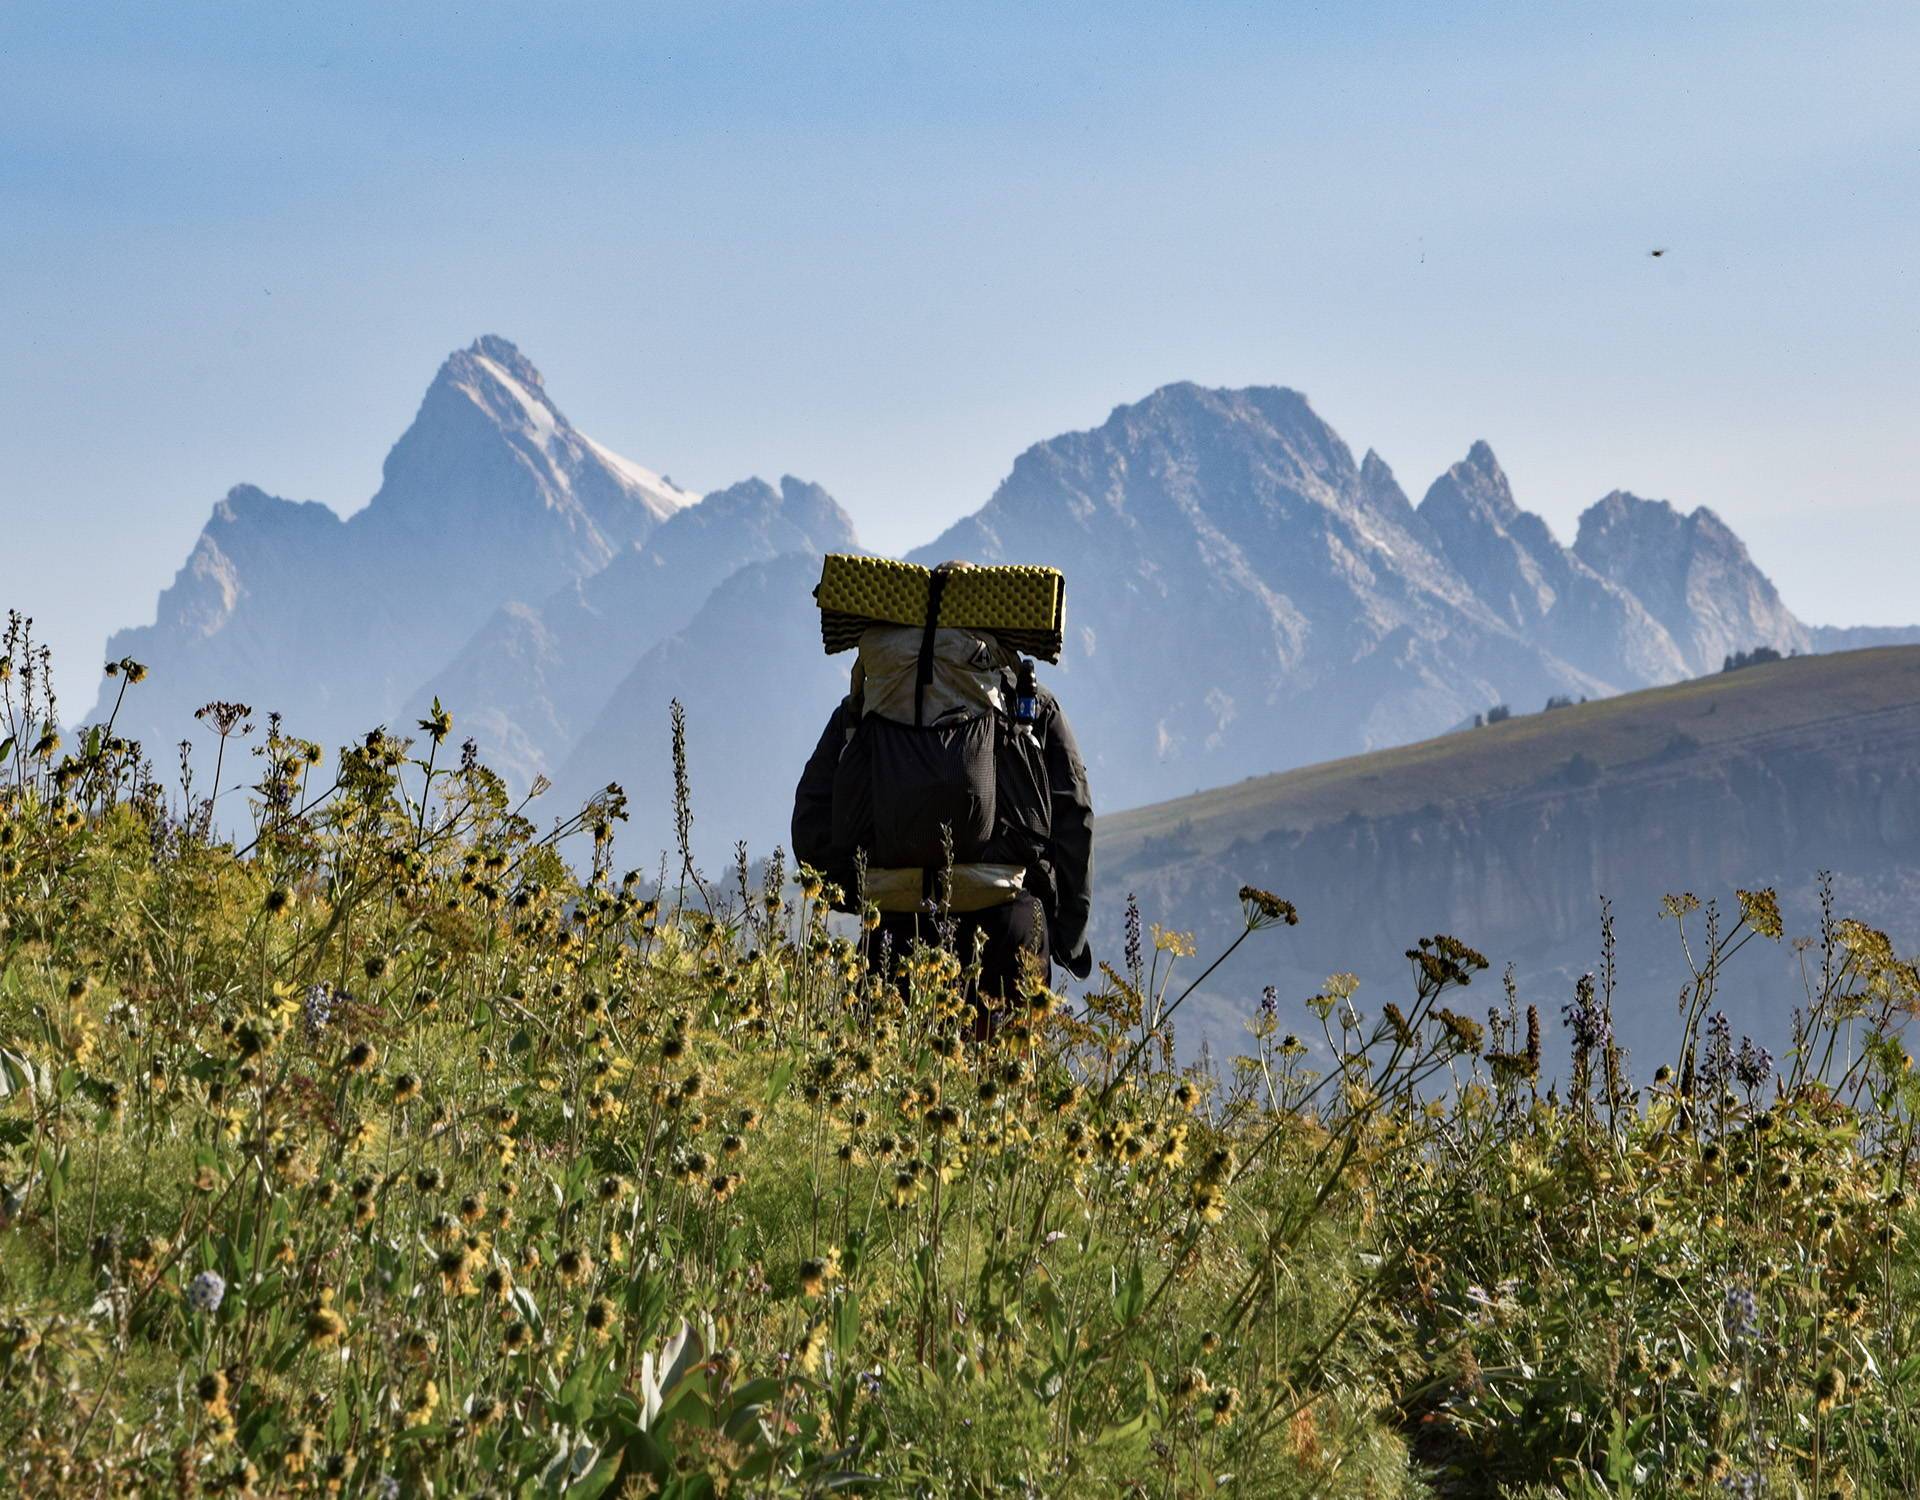 A man with a backpack walking through a field of wildflowers with mountains in the background.